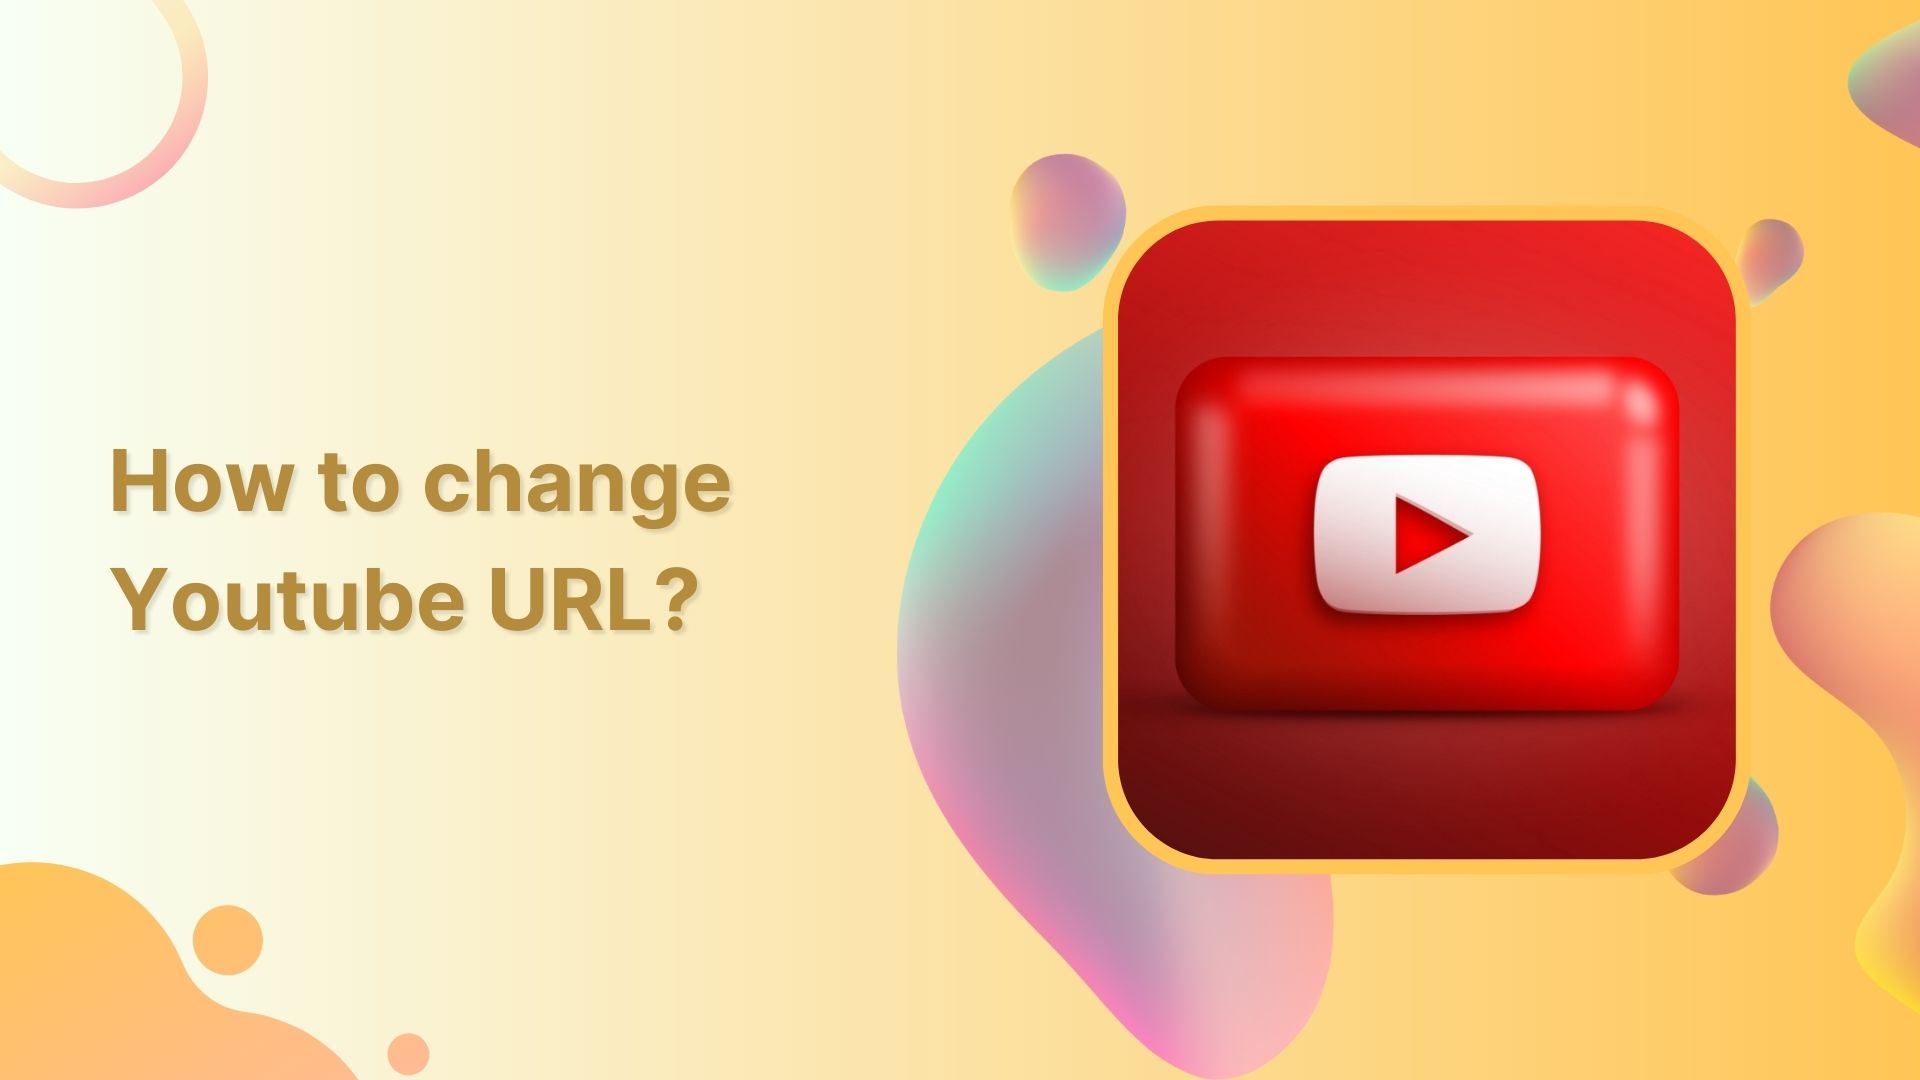 How to change YouTube URL name using a URL shortener tool?